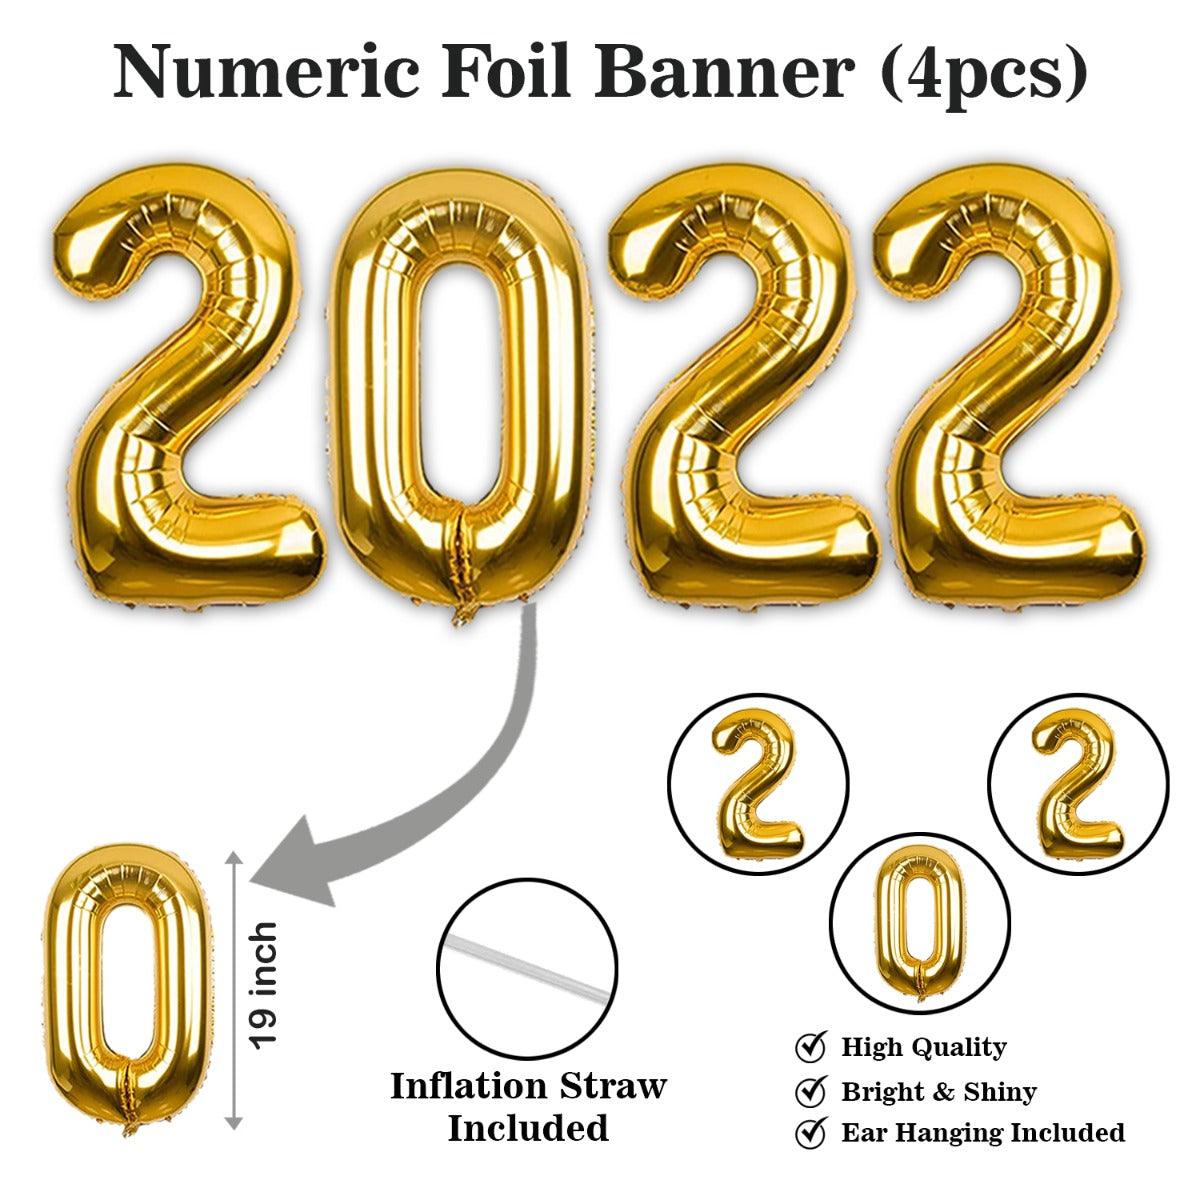 PartyCorp New Year Decoration Kit Combo 31 Pcs - Gold Chrome, Black Latex Balloon, Gold HNY Banner, Happy New Year Star, 2022 Digit Foil Balloons